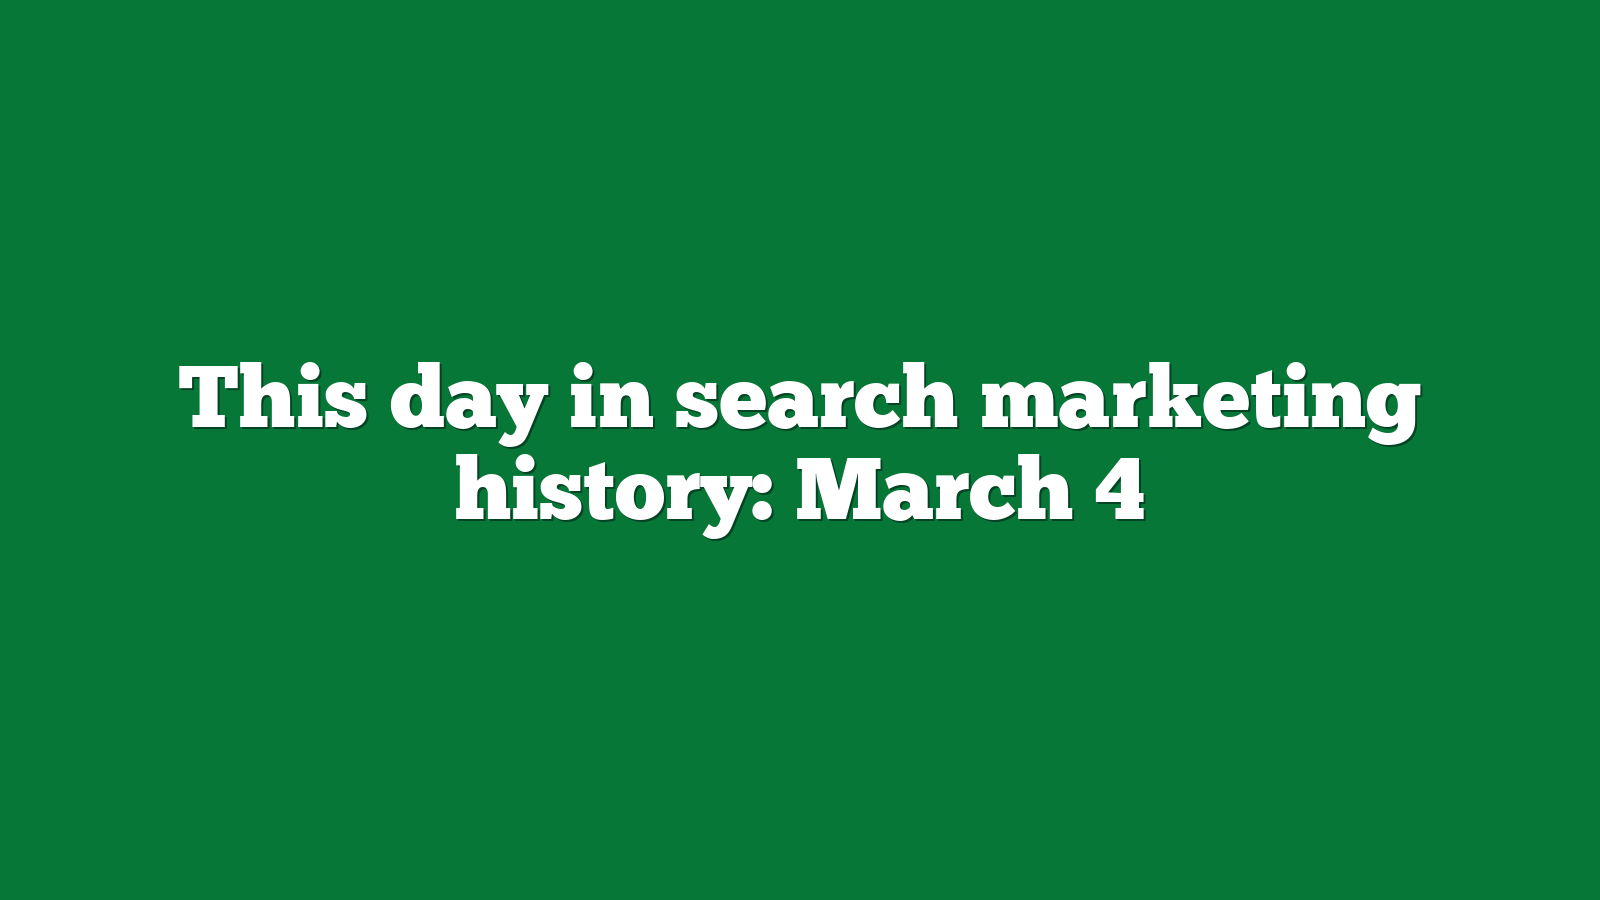 This day in search marketing history: March 4